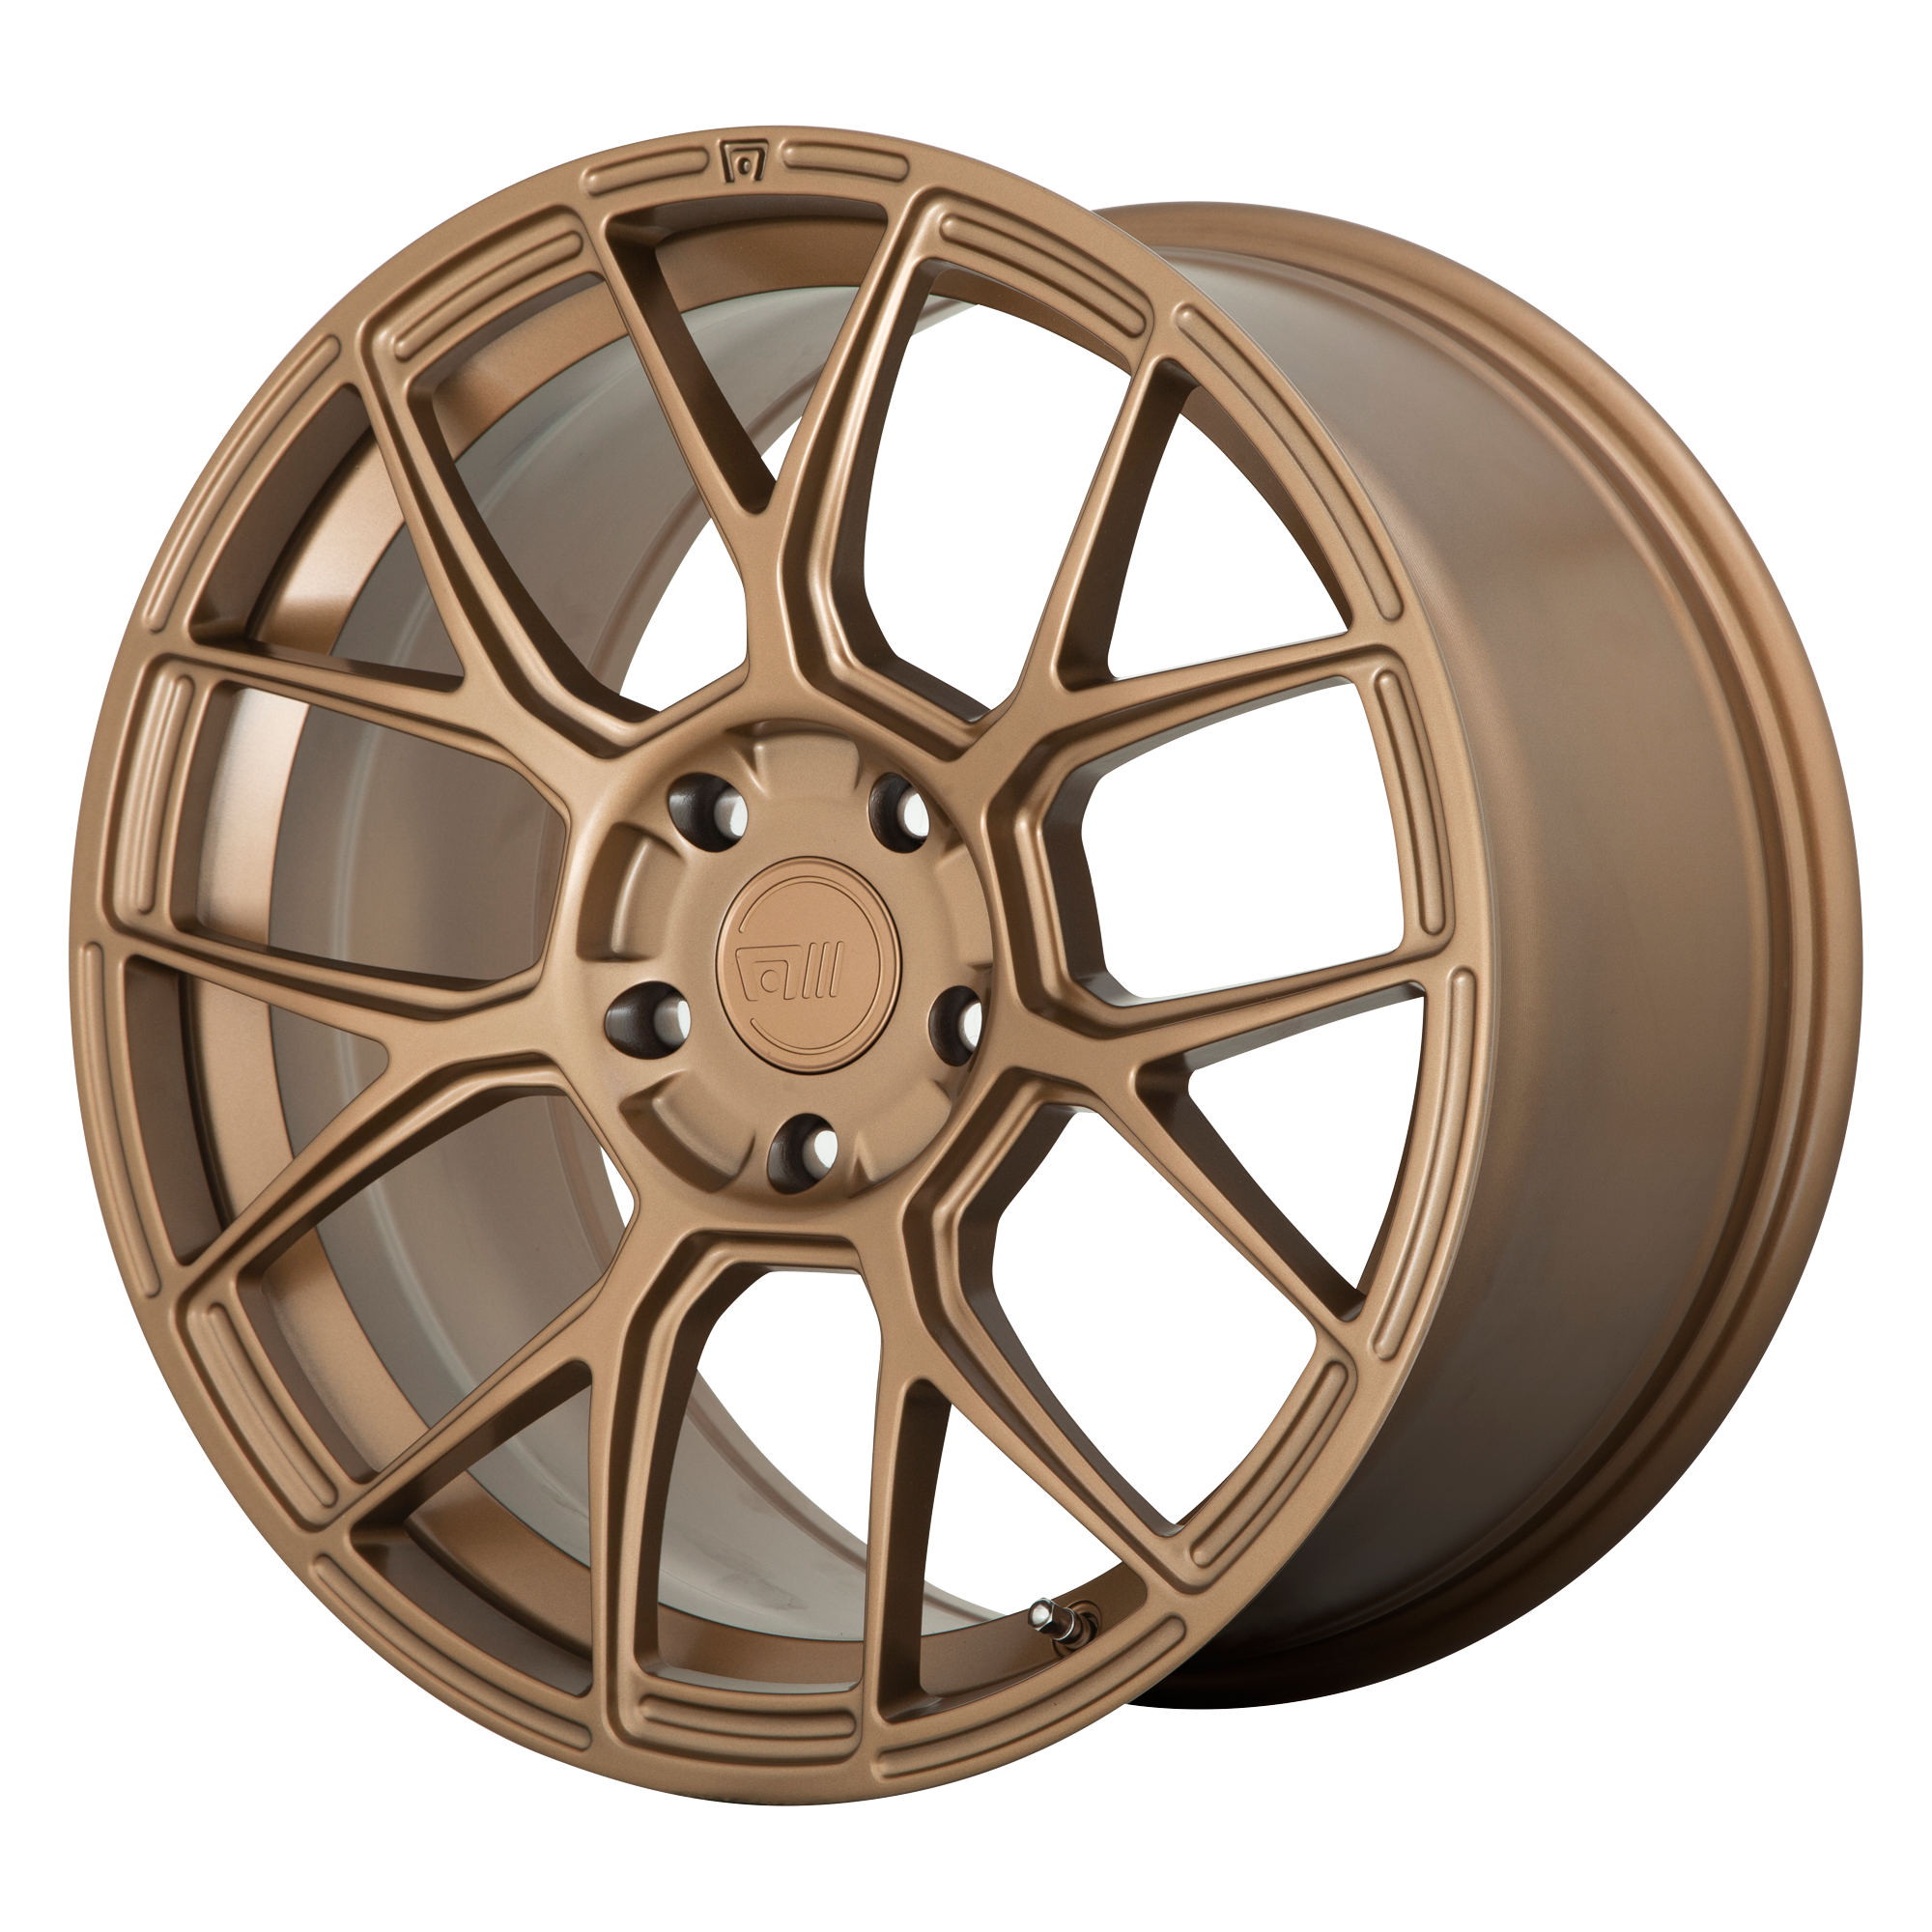 CM7 18x8.5 5x120.00 MATTE BRONZE (35 mm) - Tires and Engine Performance